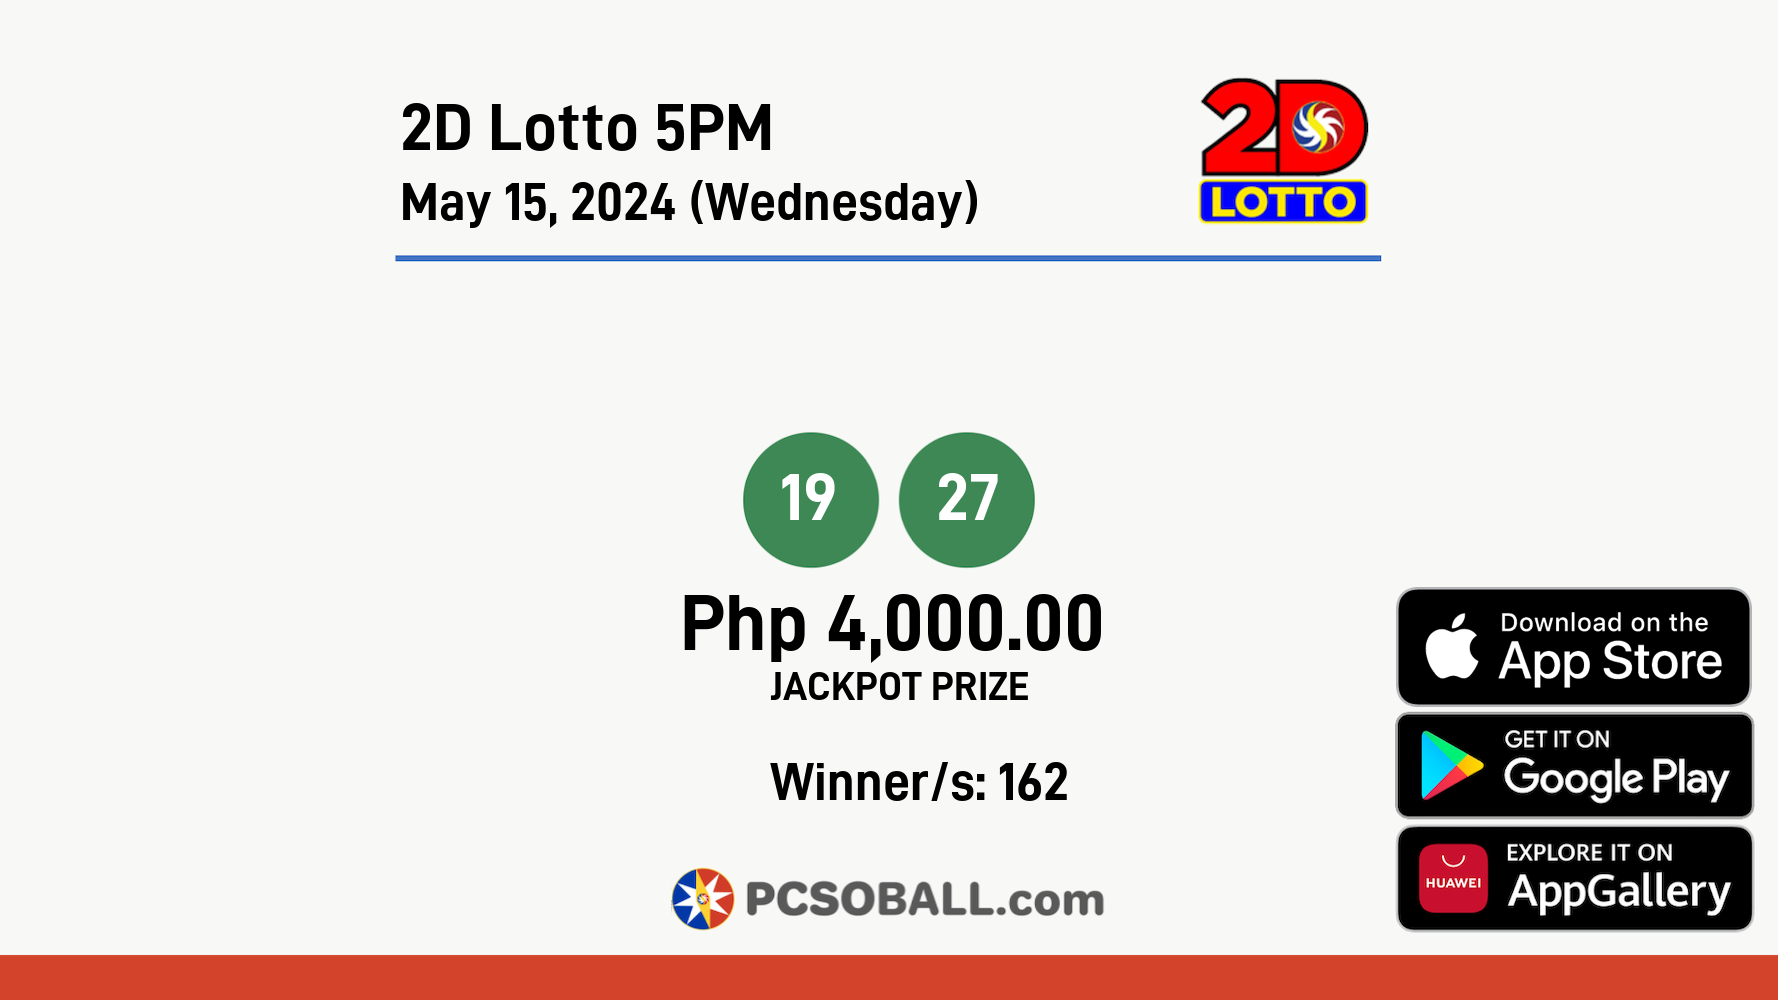 2D Lotto 5PM May 15, 2024 (Wednesday) Result